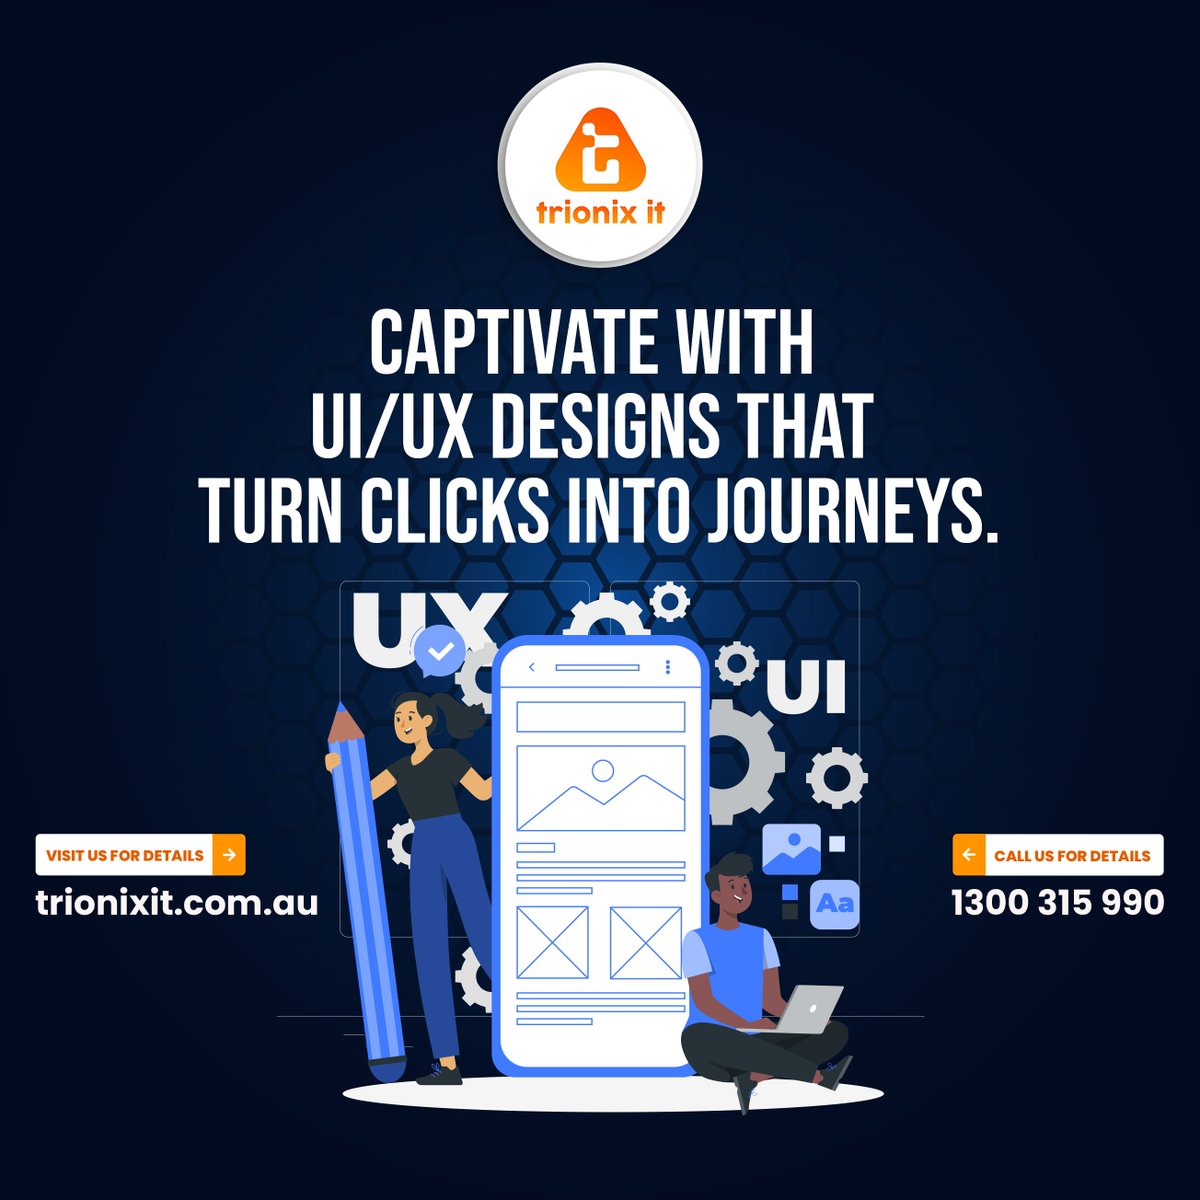 Transform clicks into unforgettable journeys with our captivating UI/UX designs! 🚀✨ Let our innovative #UIUX designs guide your users on an immersive digital adventure.🌟

#UserExperience #UserInterface #DesignInspiration #DigitalJourneys #InteractiveDesign #InnovativeUX